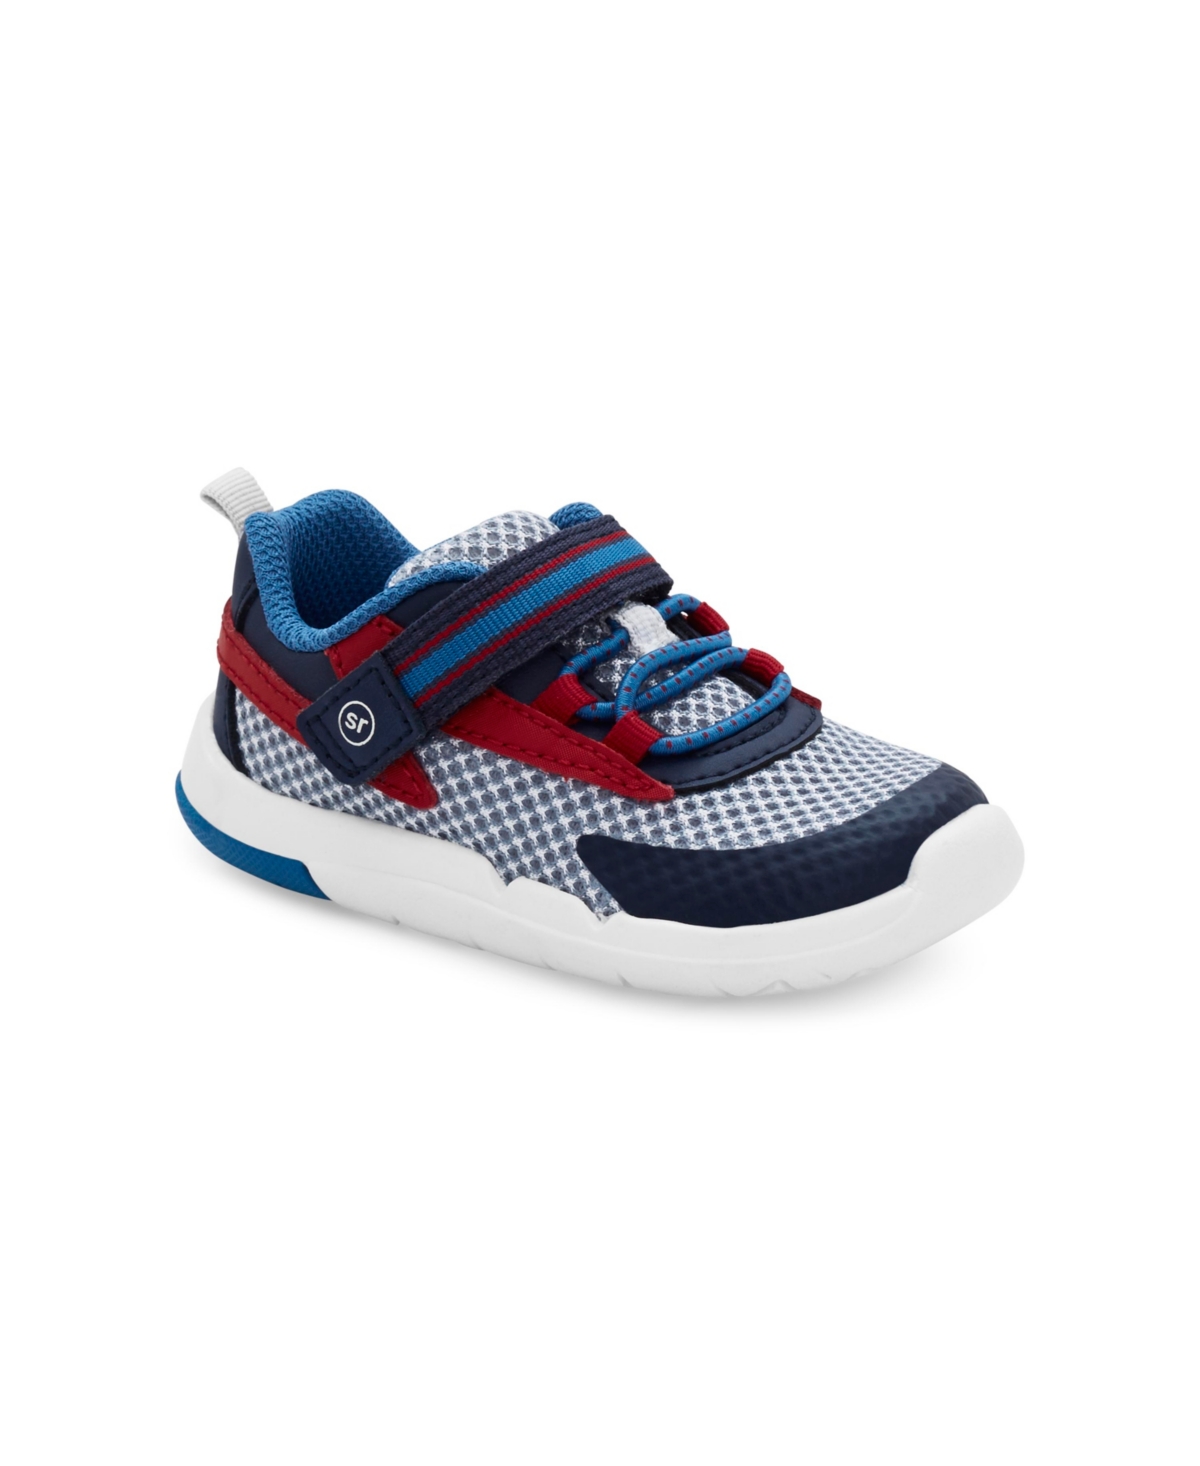 STRIDE RITE TODDLER BOYS SRTECH IAN LEATHER SNEAKERS